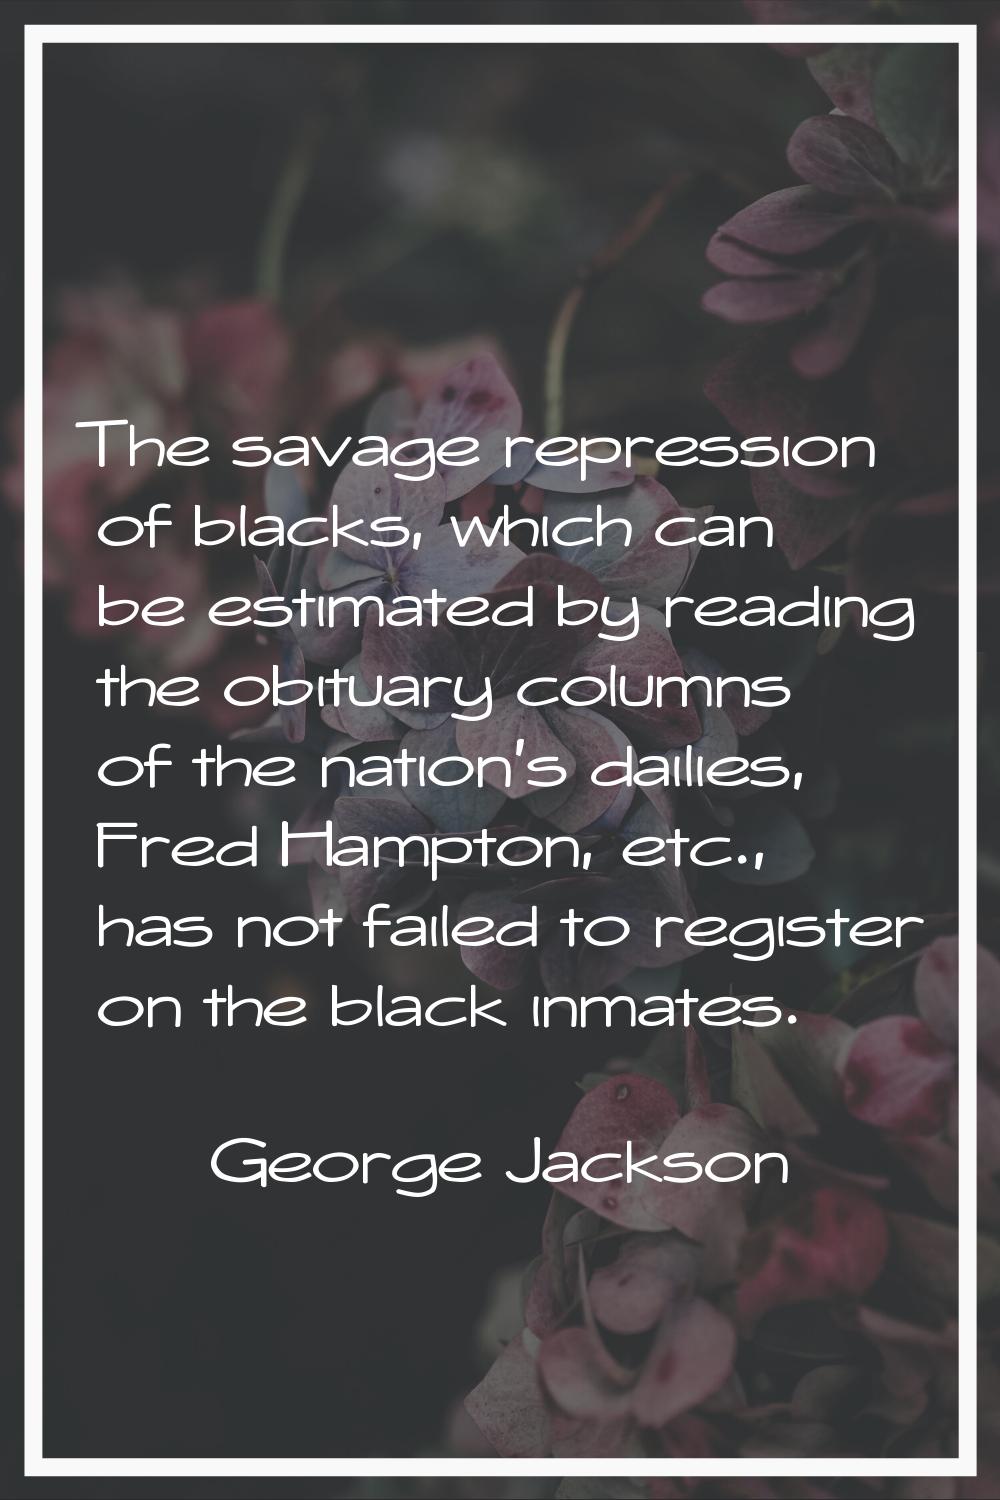 The savage repression of blacks, which can be estimated by reading the obituary columns of the nati